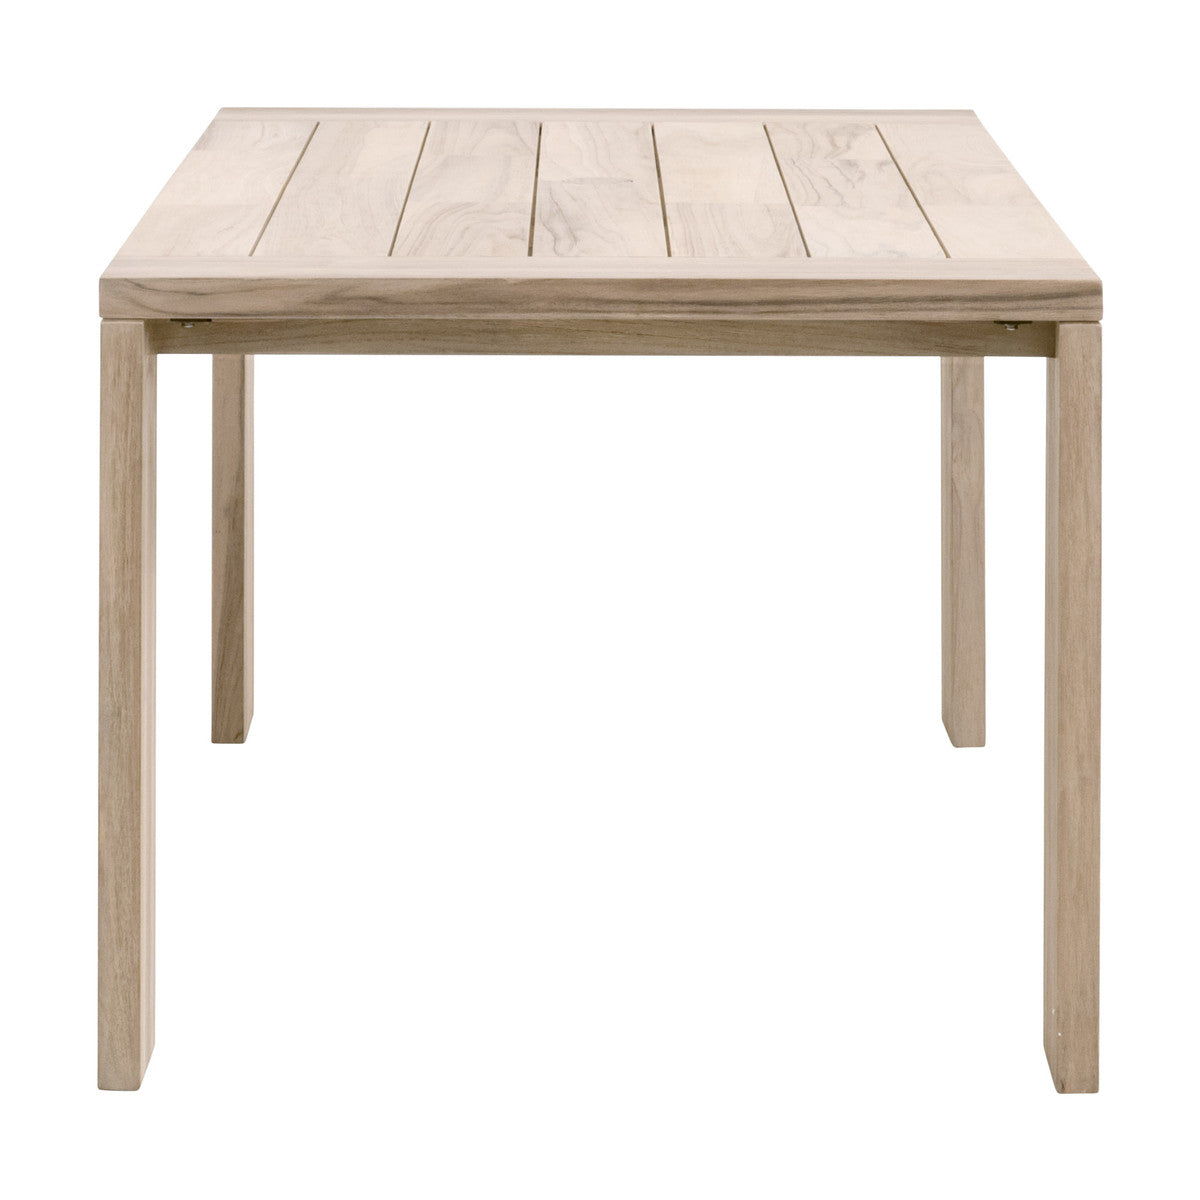 Boxhill's Sur Outdoor Dining Table 72" solo image